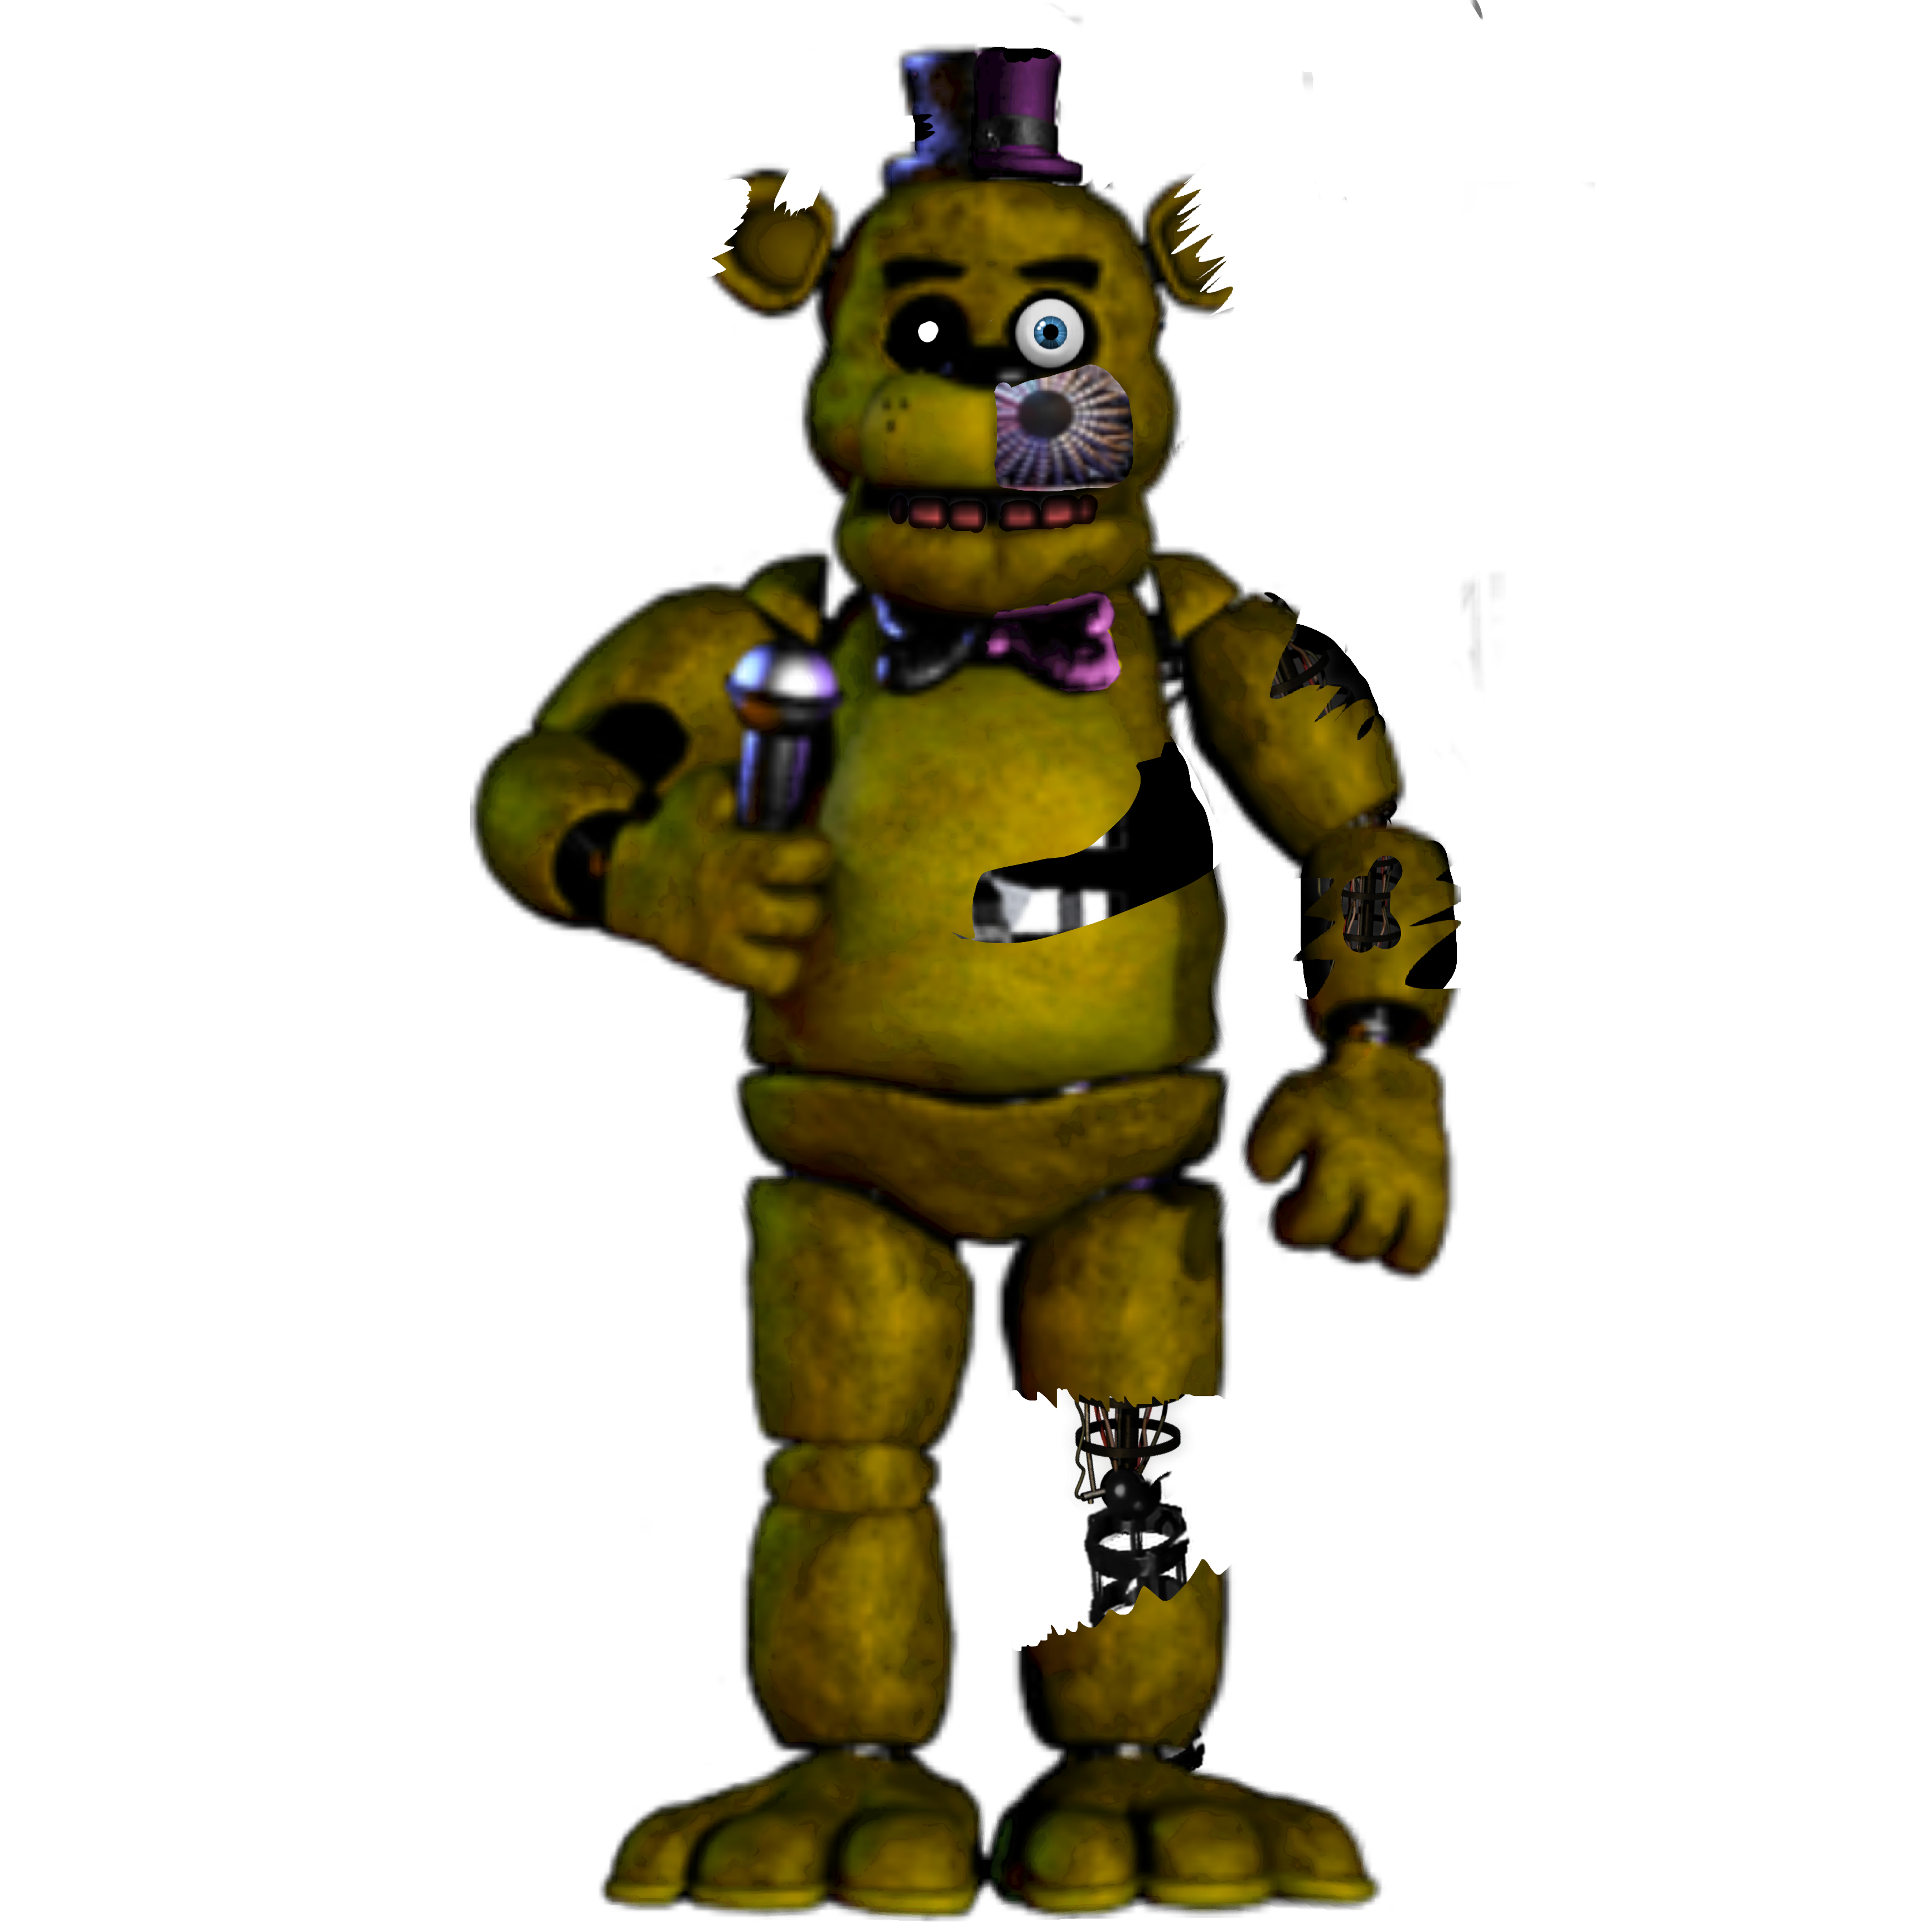 This visual is about fnaf freetoedit #fnaf Stylized withered golden freddy.